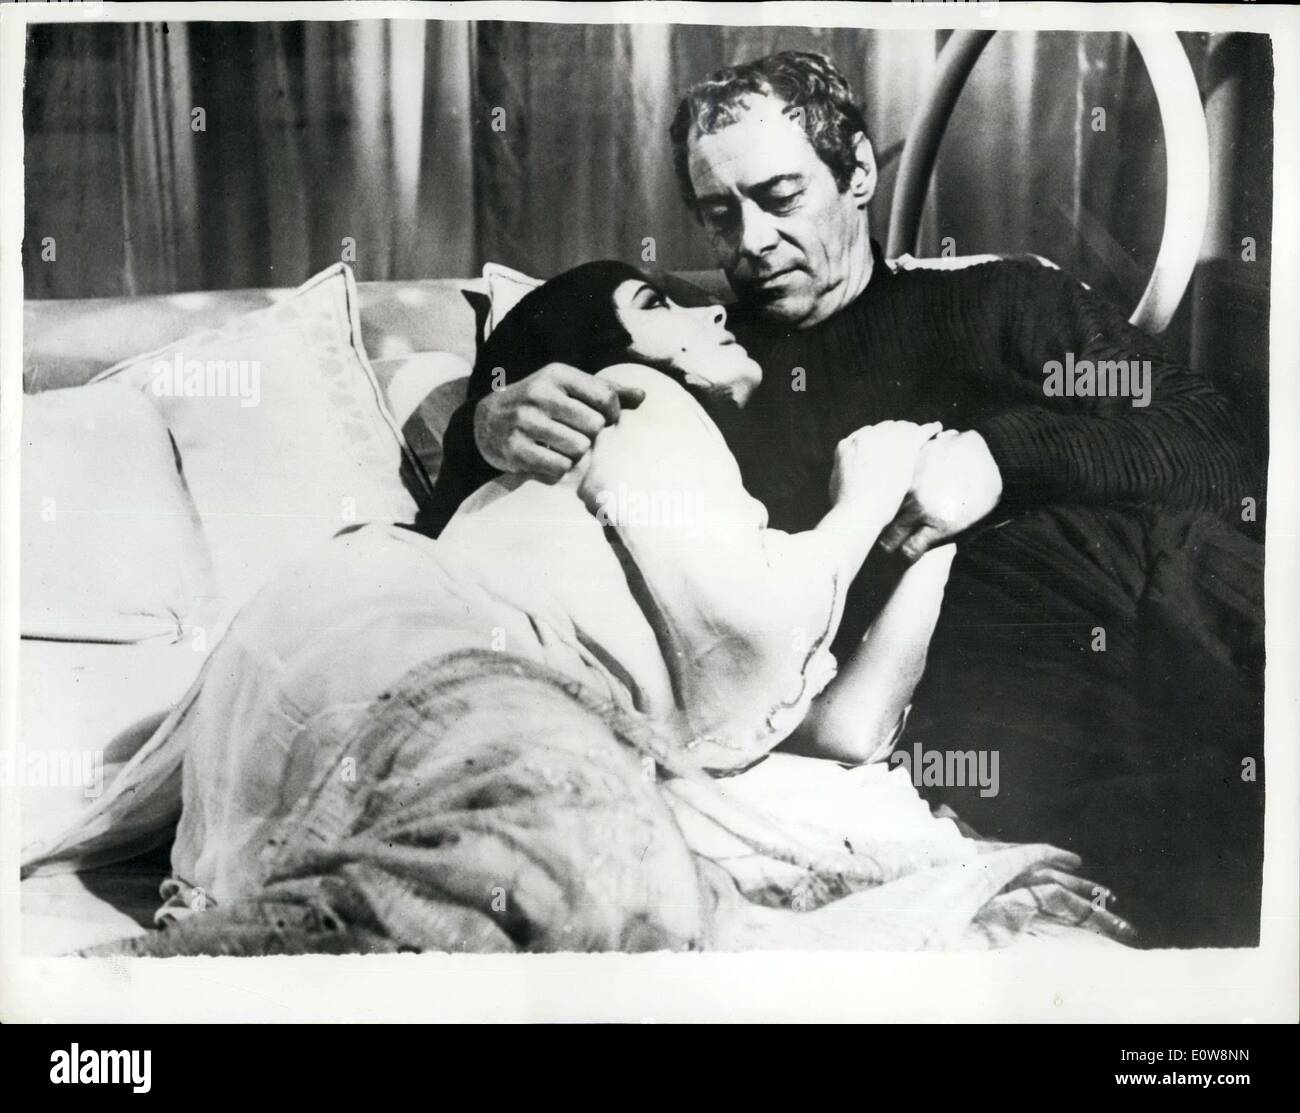 Jan. 29, 1962 - Wedding night scene from Cleopatra starring Rex Harrison and Liz Taylor: Photo shows A scene from the wedding night sequence of the film Cleopatra now being made in Rome with Rex Harrison as Julius Caesar and Elizabeth Taylor in the title role. Stock Photo